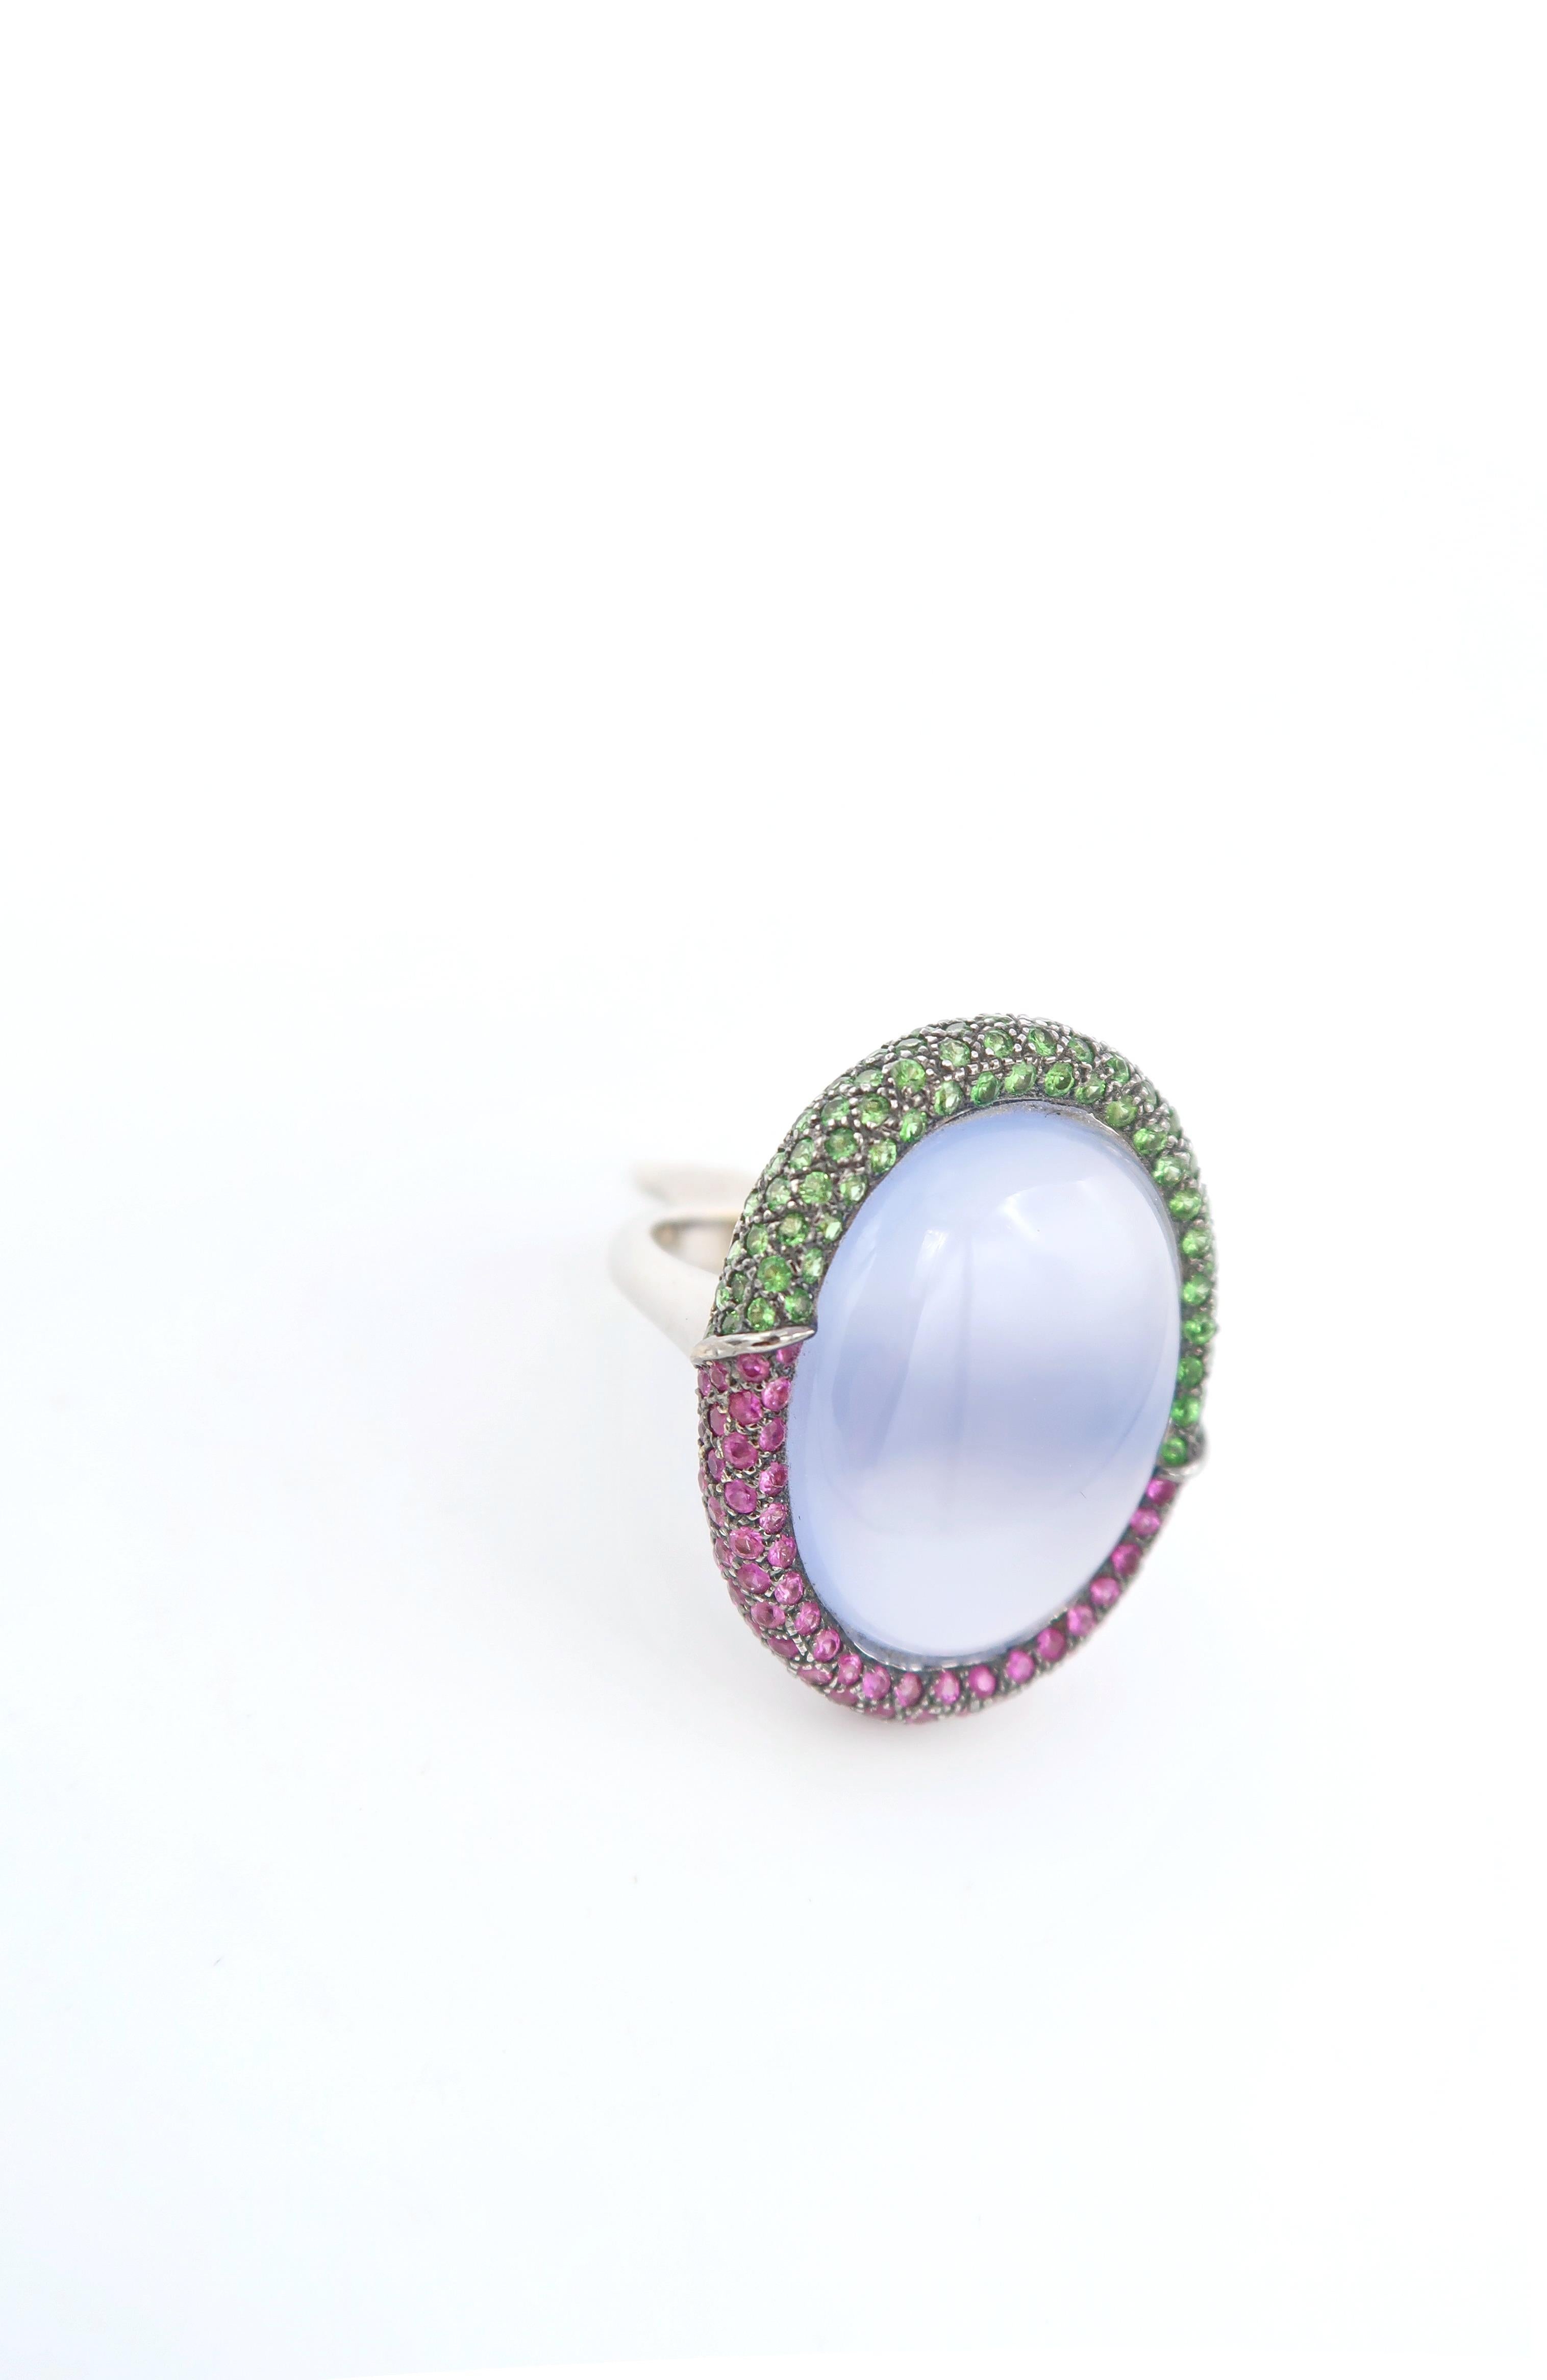 Oval Cut 24.47 Carat Medallion Oval Cabochon Chalcedony Pink Sapphire Tsavorite Gold Ring For Sale